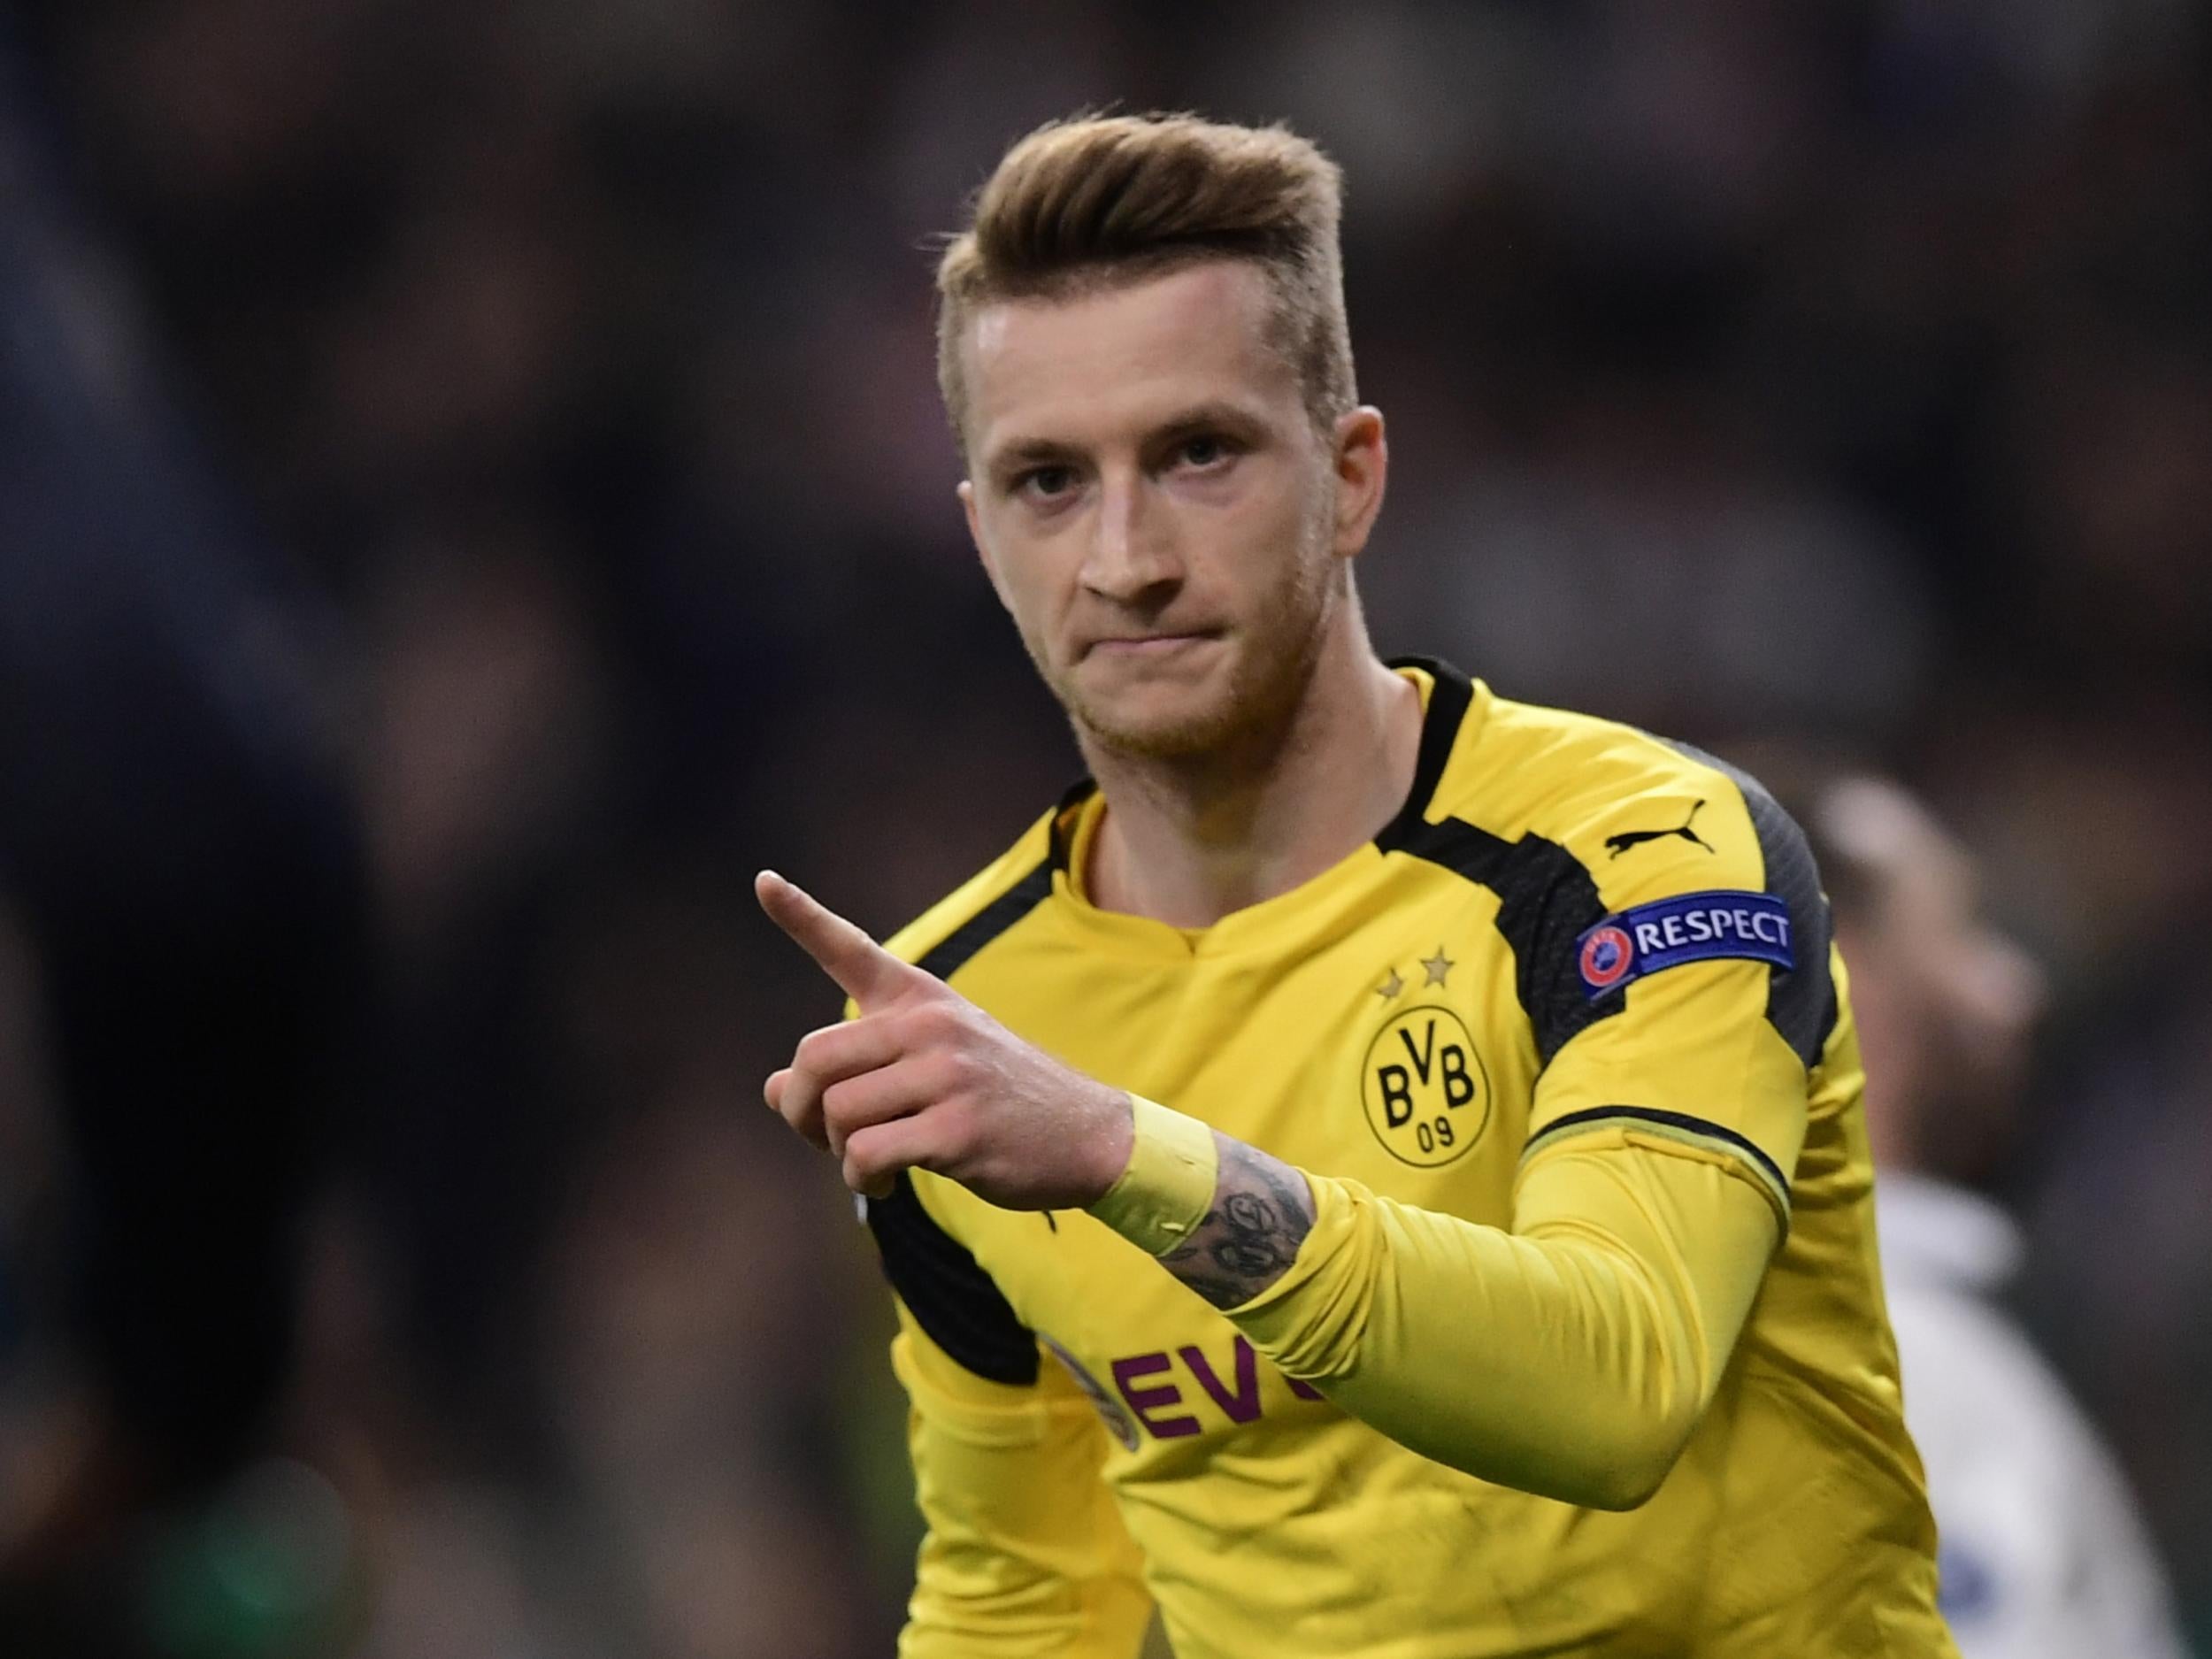 Reus sealed the comeback with his 88th-minute strike